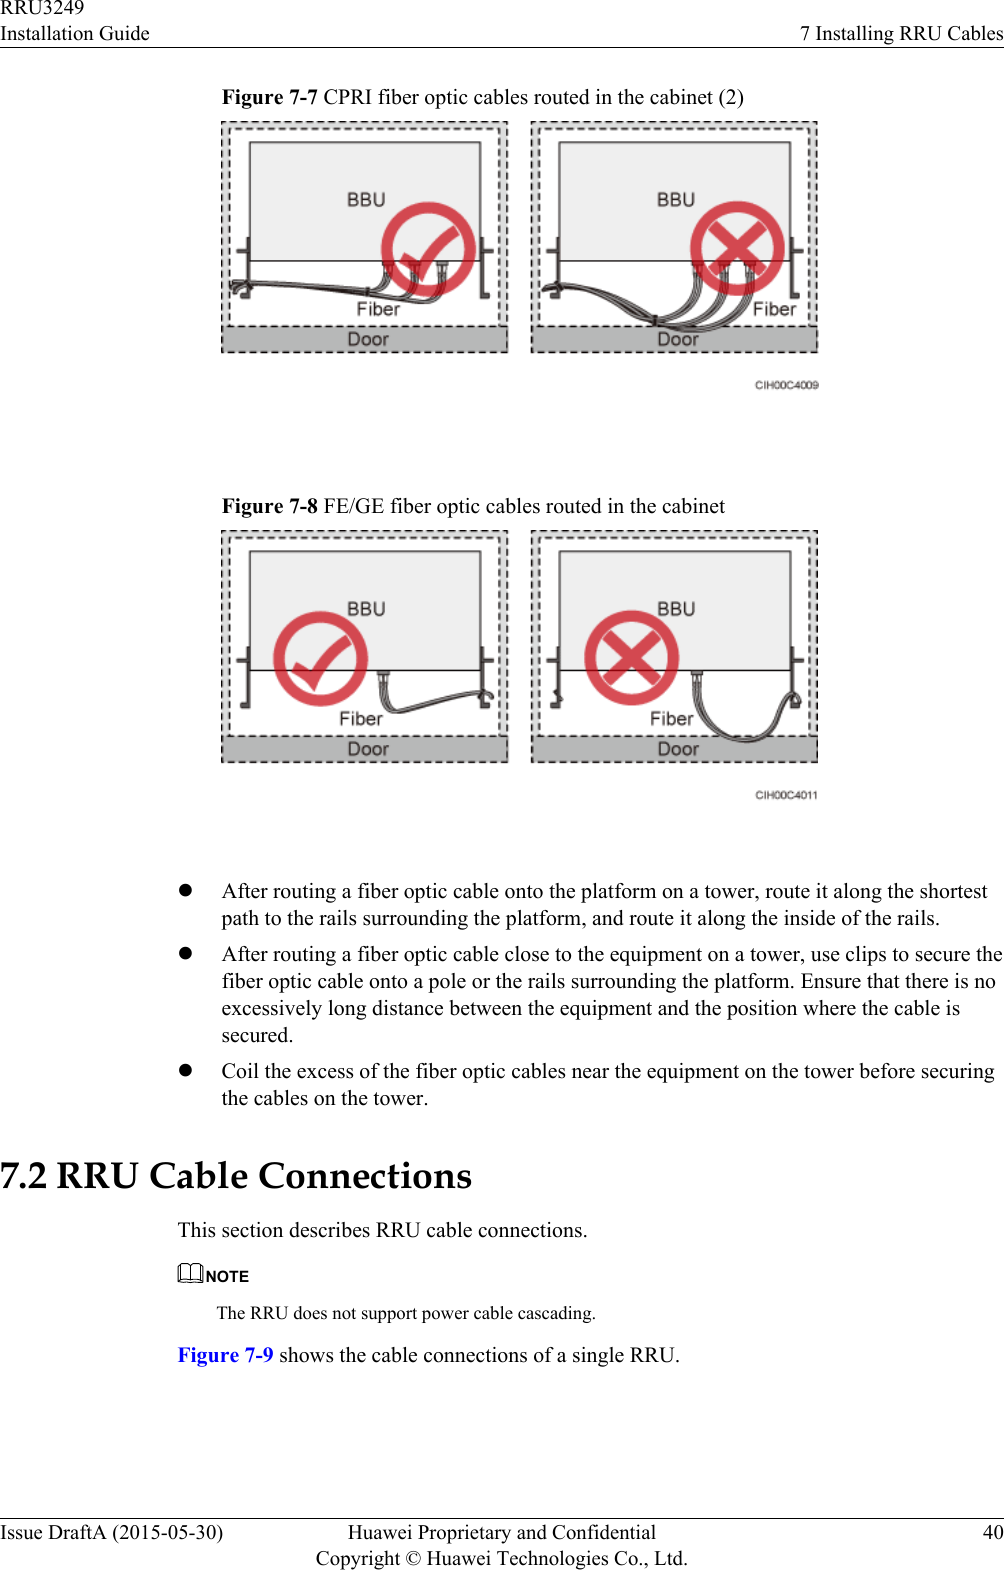 Figure 7-7 CPRI fiber optic cables routed in the cabinet (2) Figure 7-8 FE/GE fiber optic cables routed in the cabinet lAfter routing a fiber optic cable onto the platform on a tower, route it along the shortestpath to the rails surrounding the platform, and route it along the inside of the rails.lAfter routing a fiber optic cable close to the equipment on a tower, use clips to secure thefiber optic cable onto a pole or the rails surrounding the platform. Ensure that there is noexcessively long distance between the equipment and the position where the cable issecured.lCoil the excess of the fiber optic cables near the equipment on the tower before securingthe cables on the tower.7.2 RRU Cable ConnectionsThis section describes RRU cable connections.NOTEThe RRU does not support power cable cascading.Figure 7-9 shows the cable connections of a single RRU.RRU3249Installation Guide 7 Installing RRU CablesIssue DraftA (2015-05-30) Huawei Proprietary and ConfidentialCopyright © Huawei Technologies Co., Ltd.40